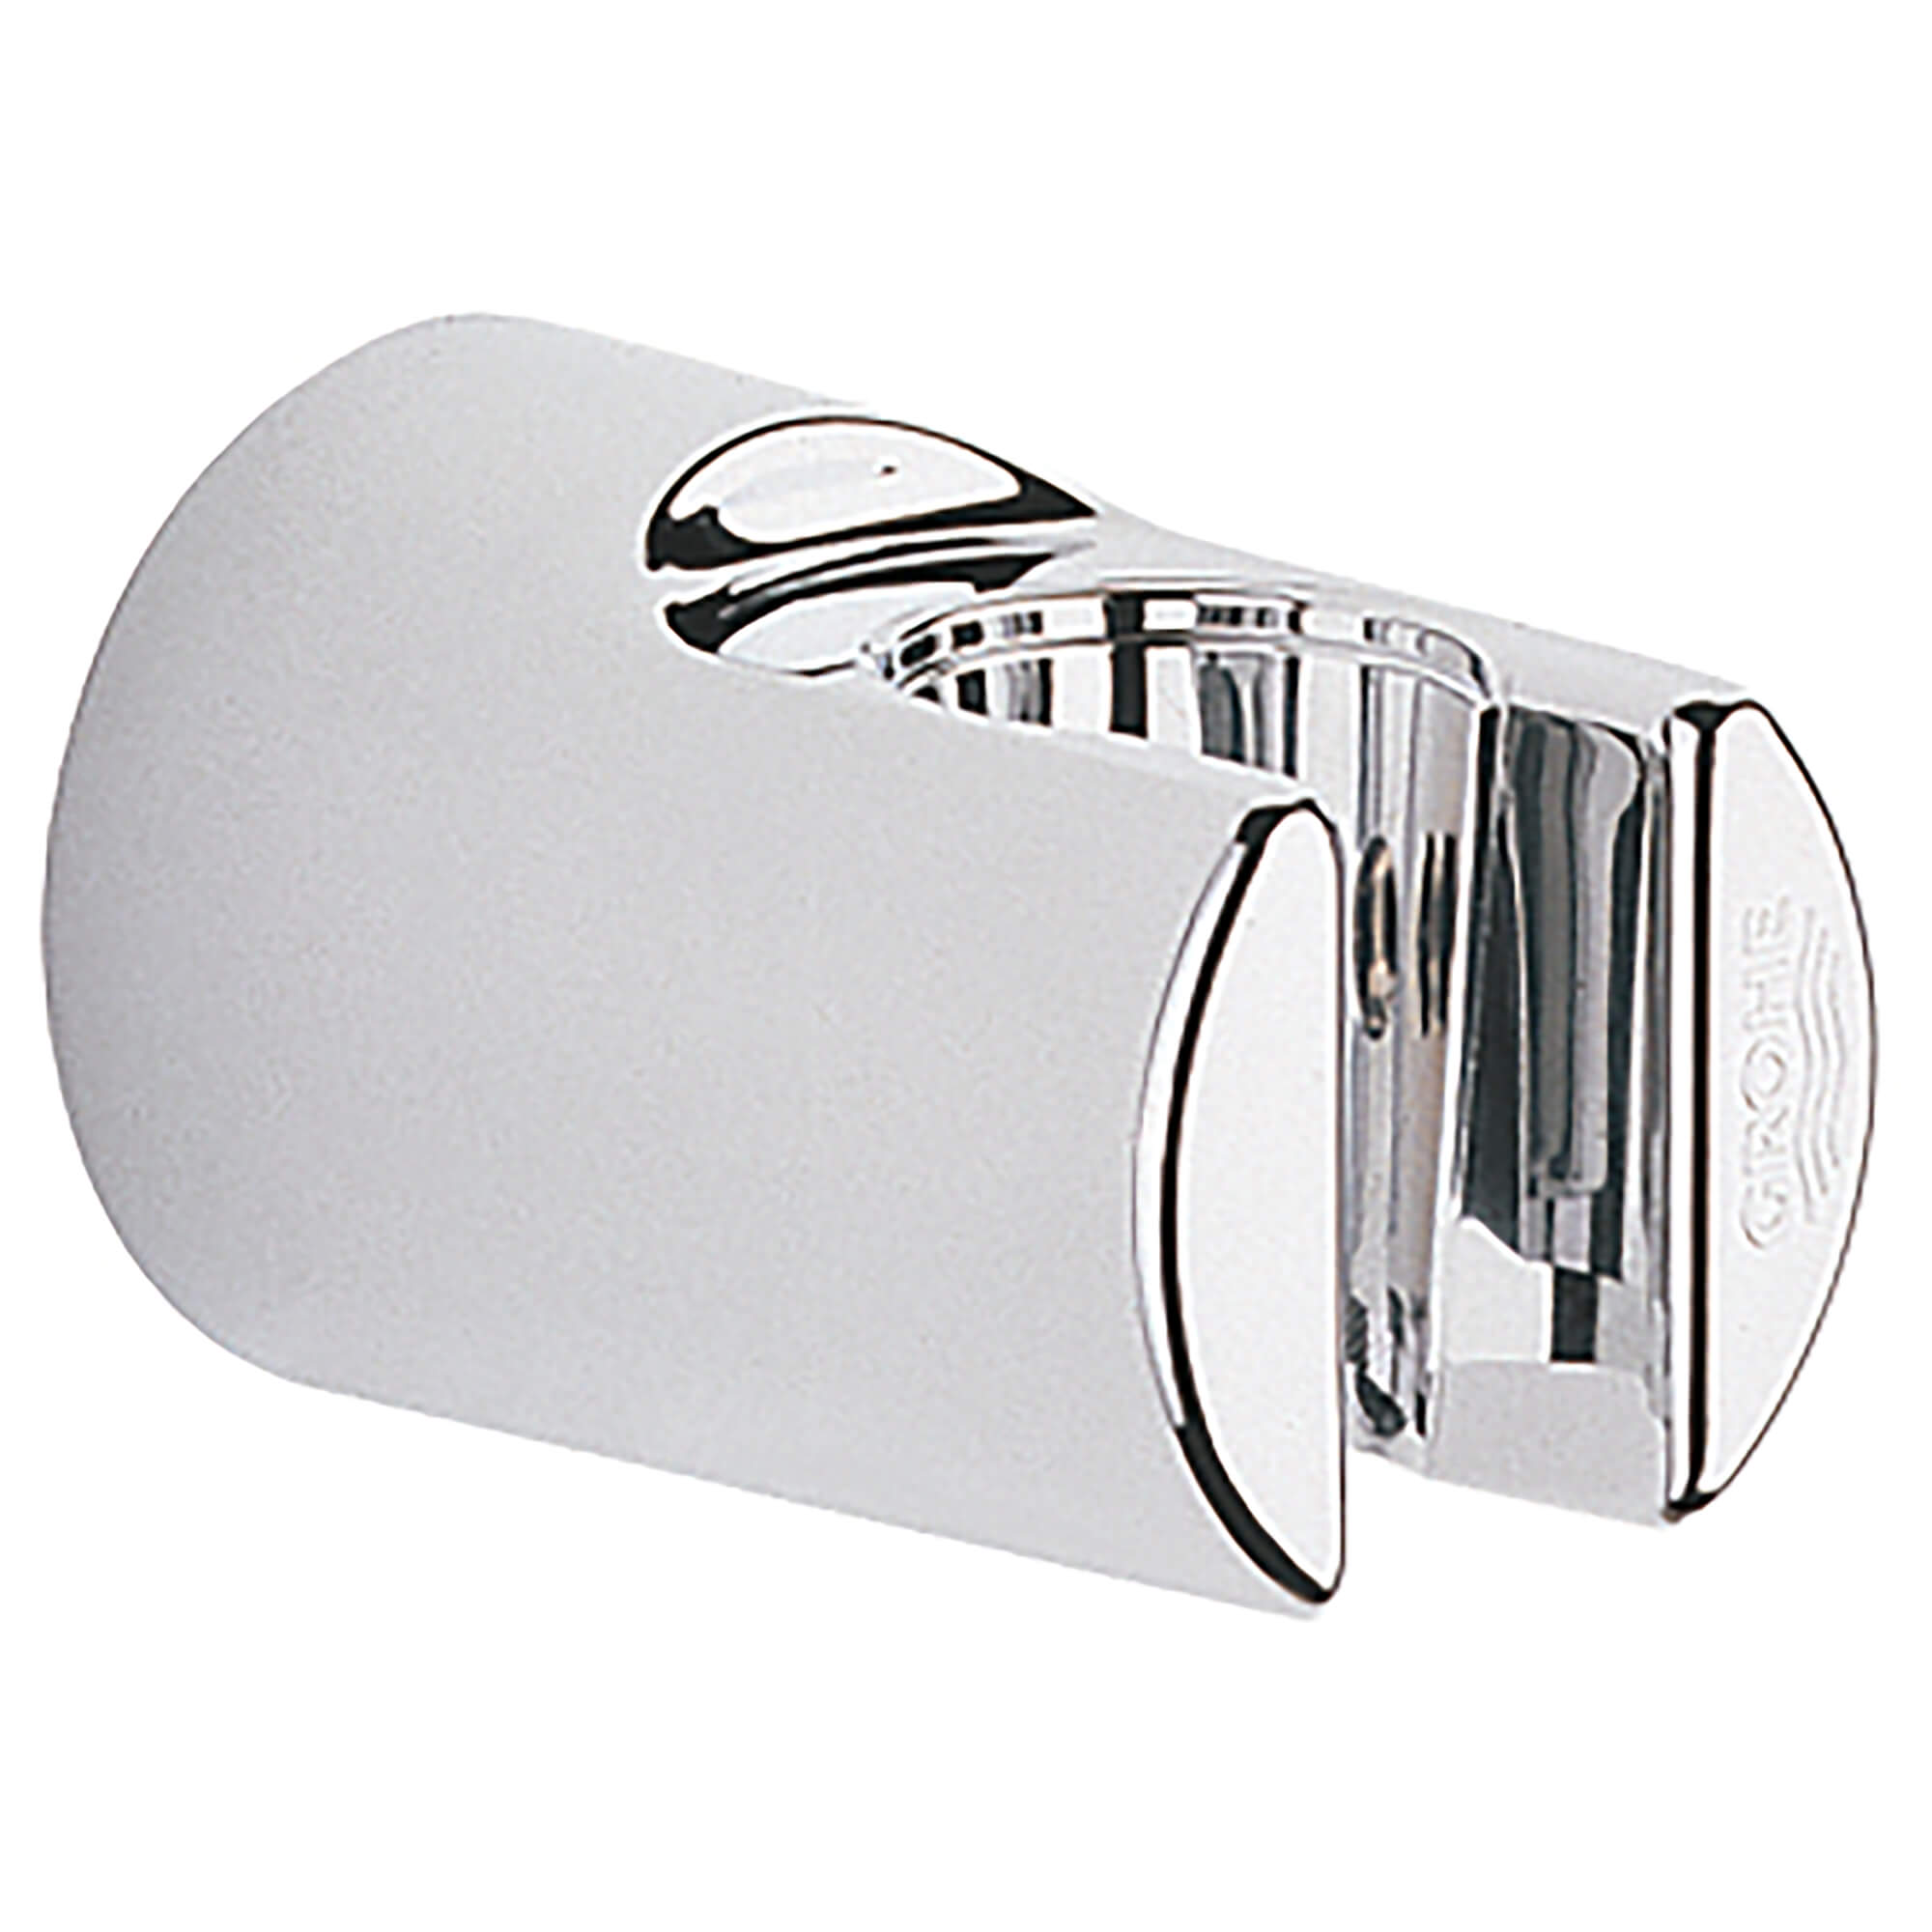 hansgrohe Fournitures: Support de douchette, N° article 28322000